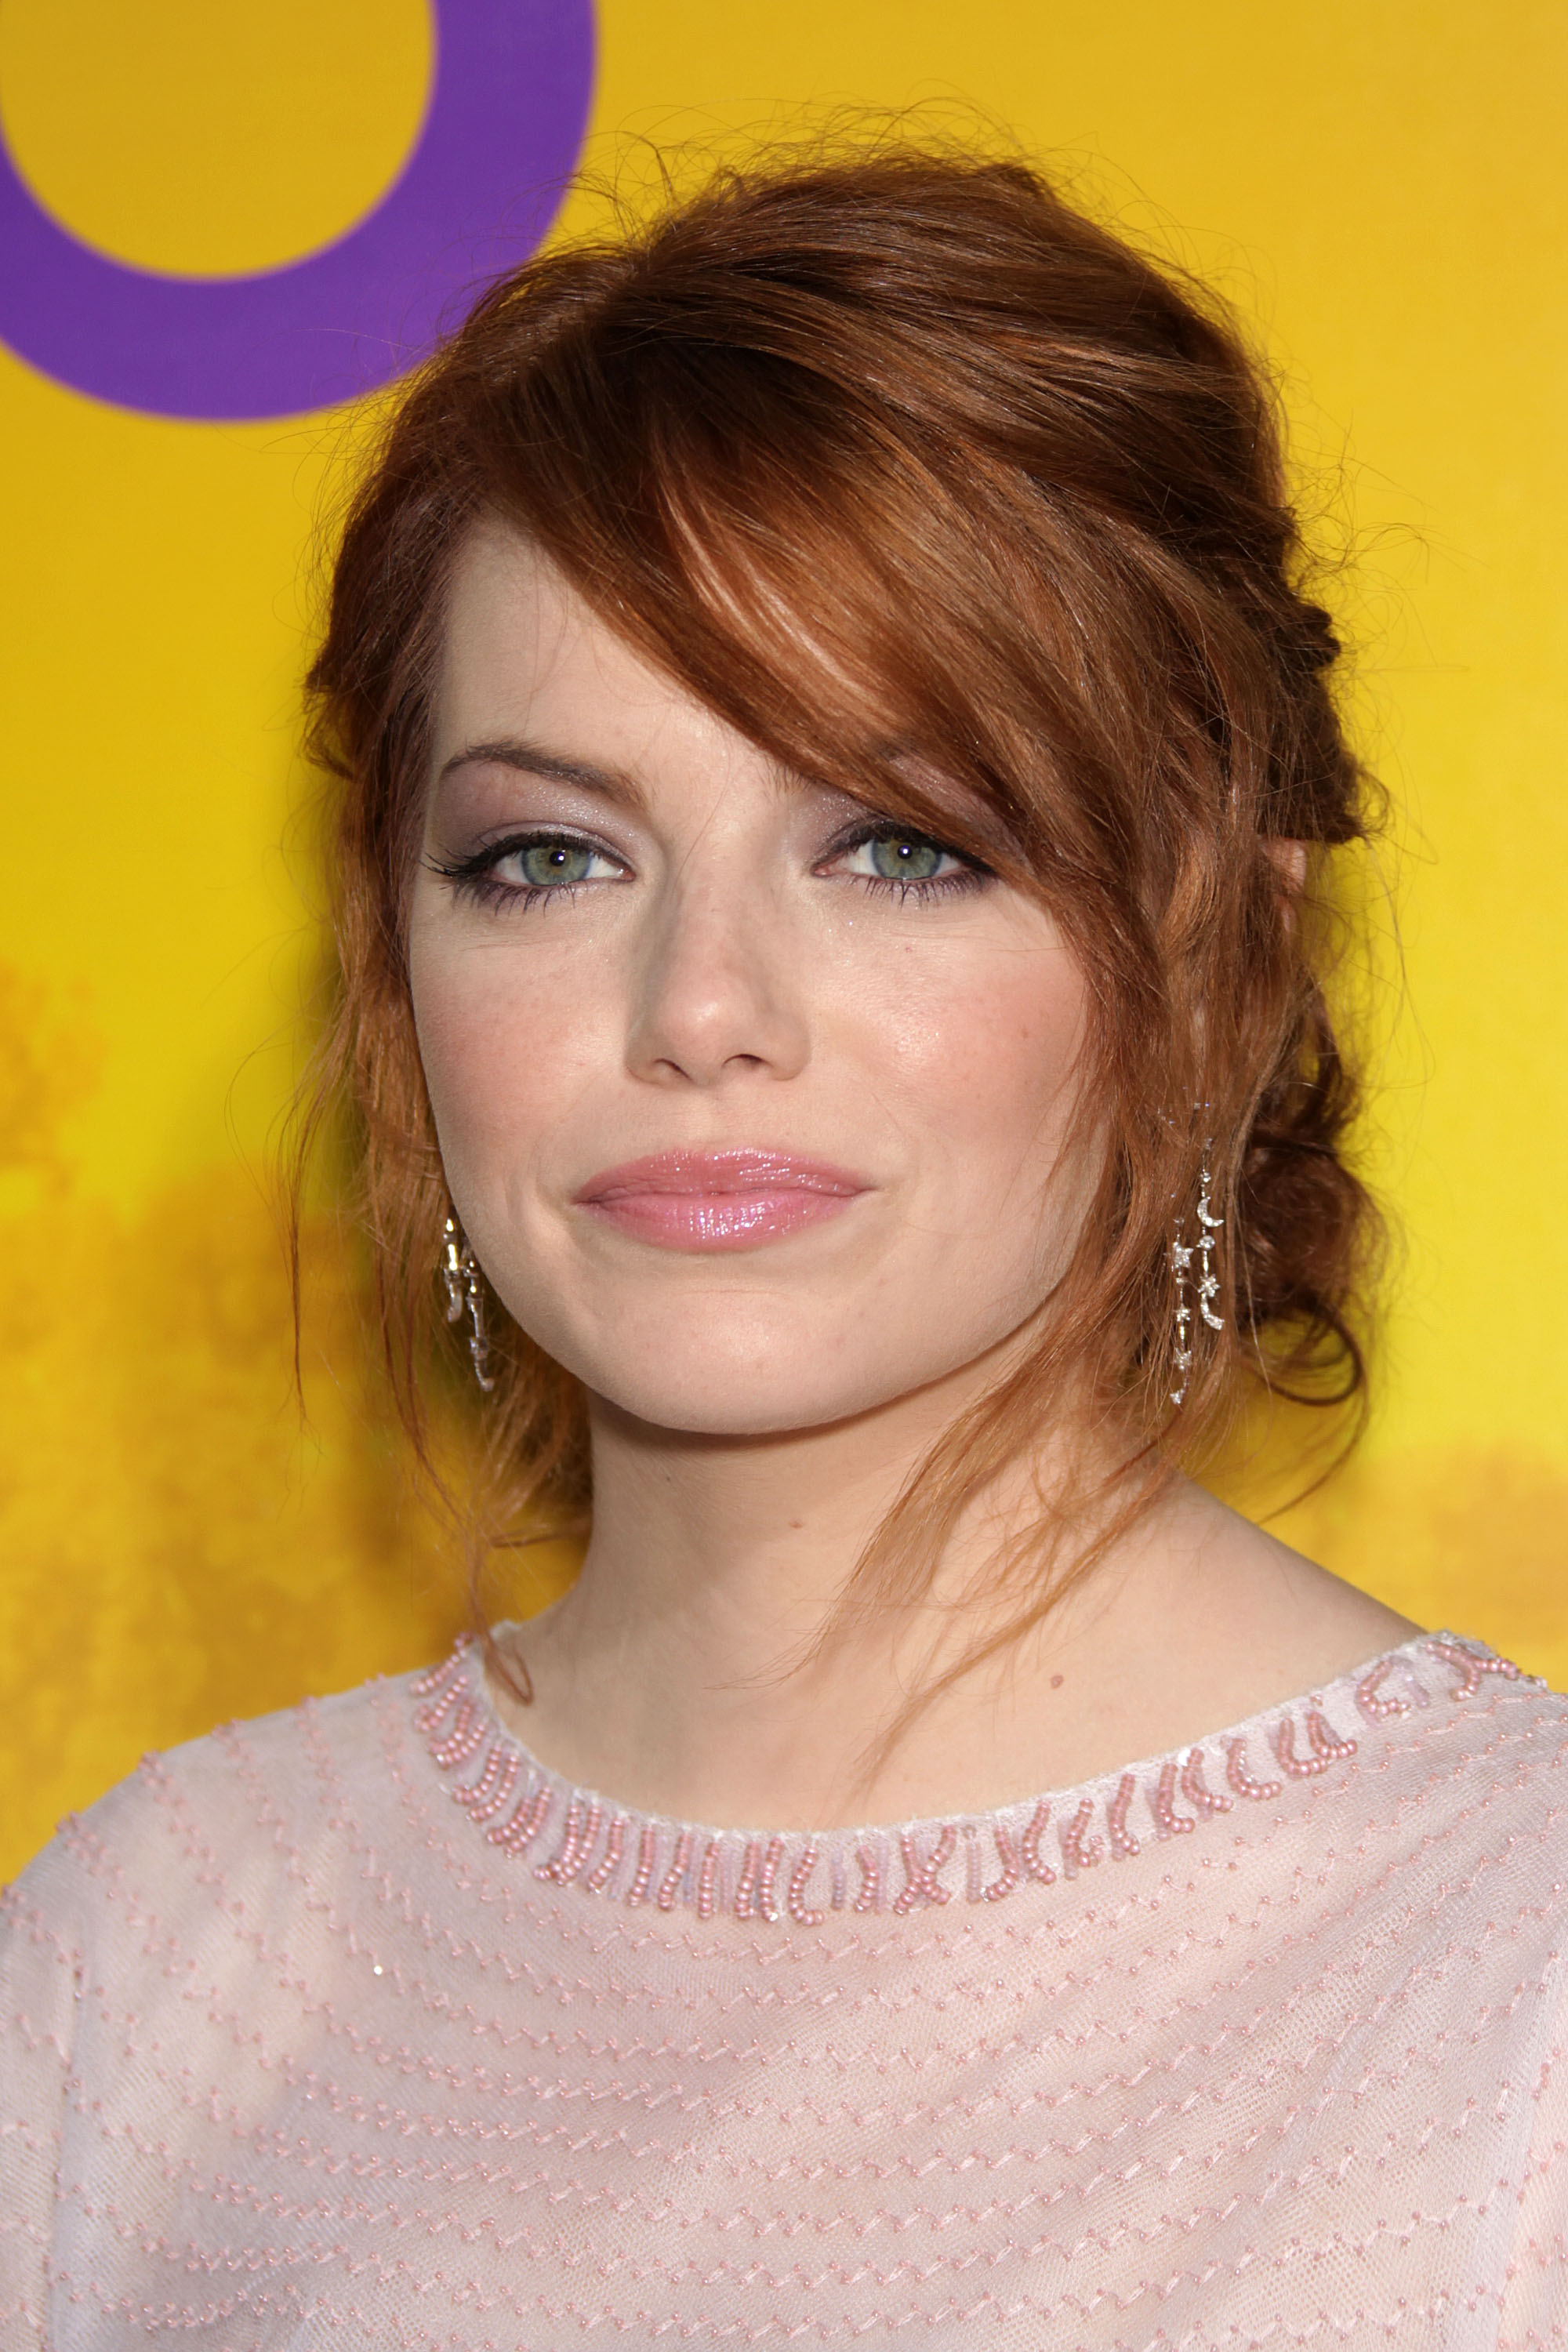 Emma Stone attends the LA Premiere of THE HELP in Samuel Goldwyn Theater, Beverly Hills on 9th August 2011